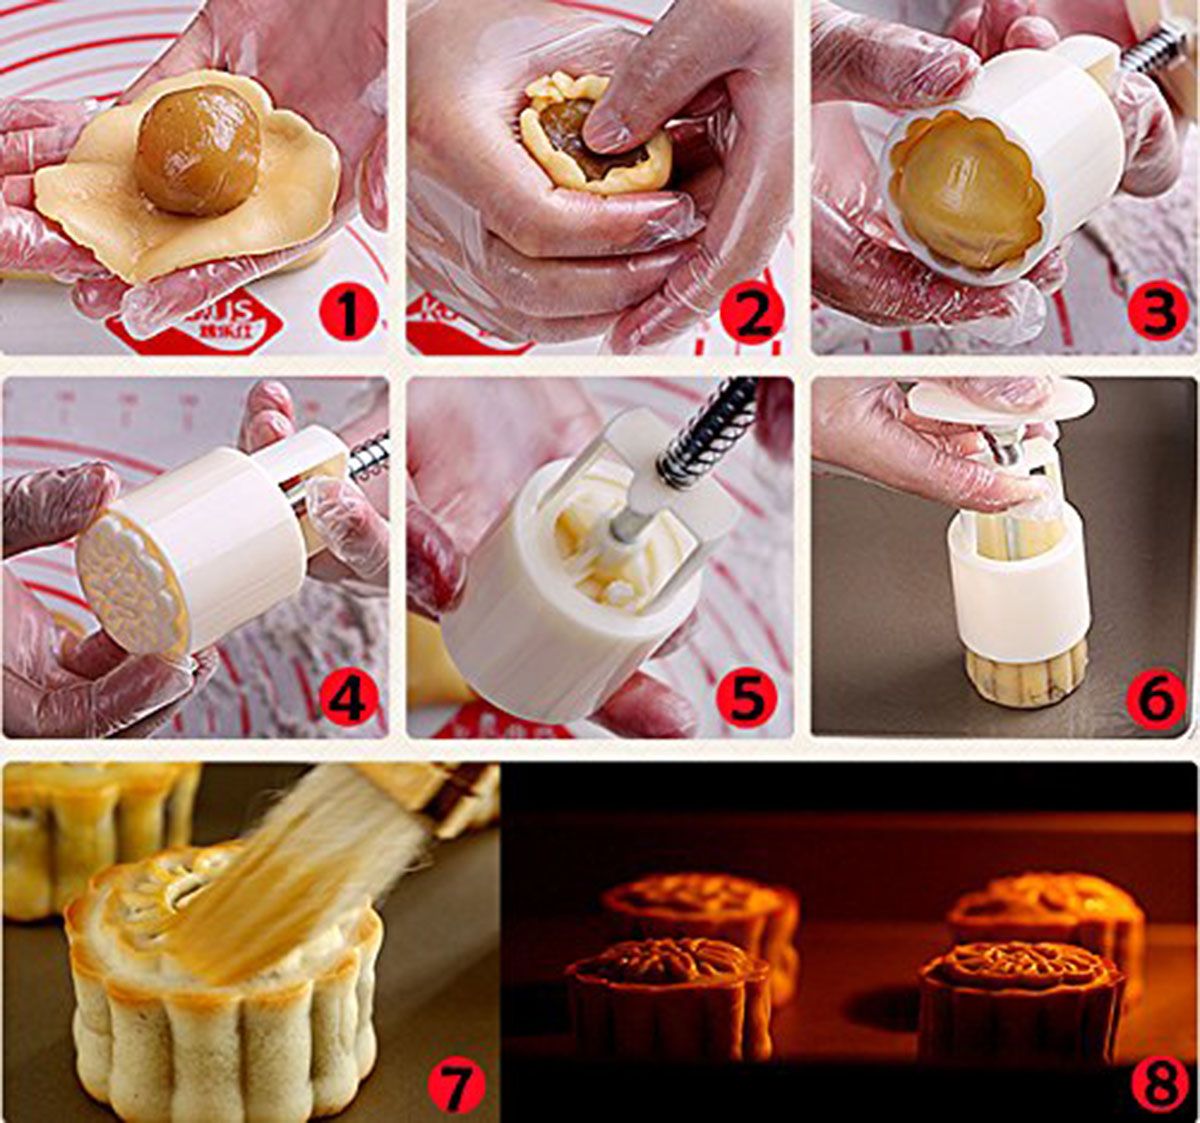 4-Sets-Mooncake-Pastry-Press-Mold-100g-50g-DIY-Flower-Pattern-Mould-Decor-w-20-Stamps-Round-Square-1339031